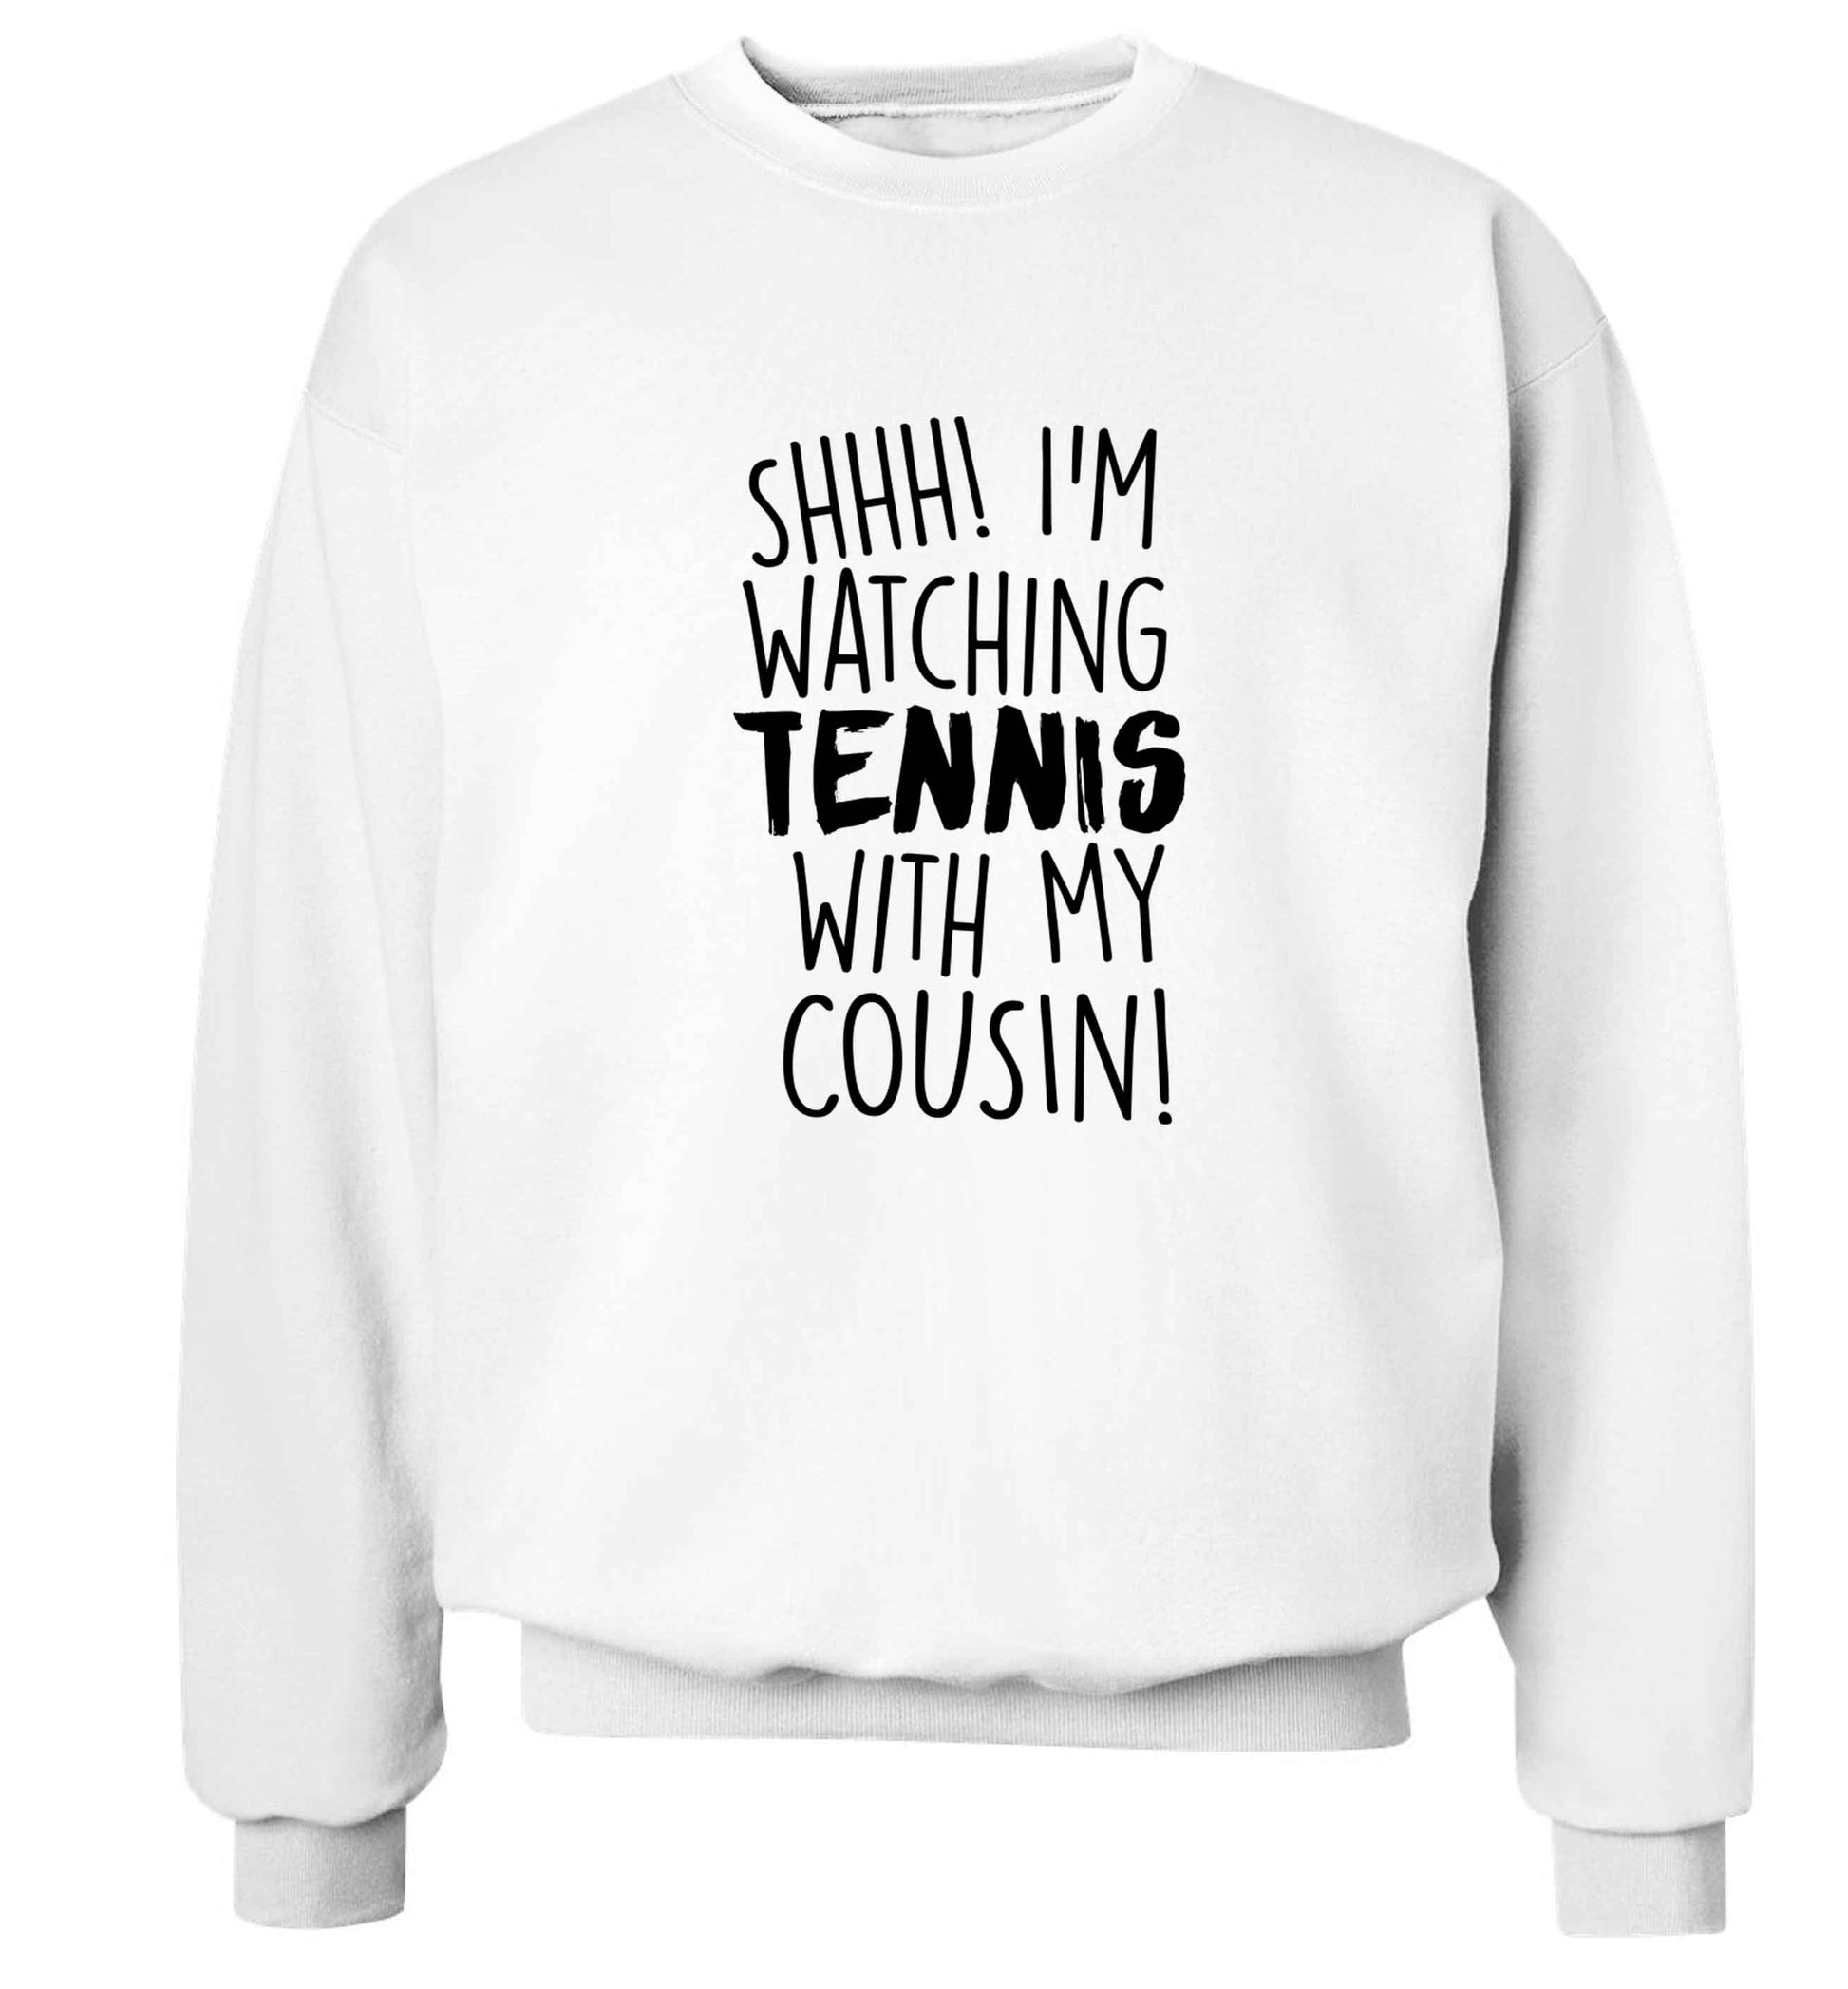 Shh! I'm watching tennis with my cousin! Adult's unisex white Sweater 2XL